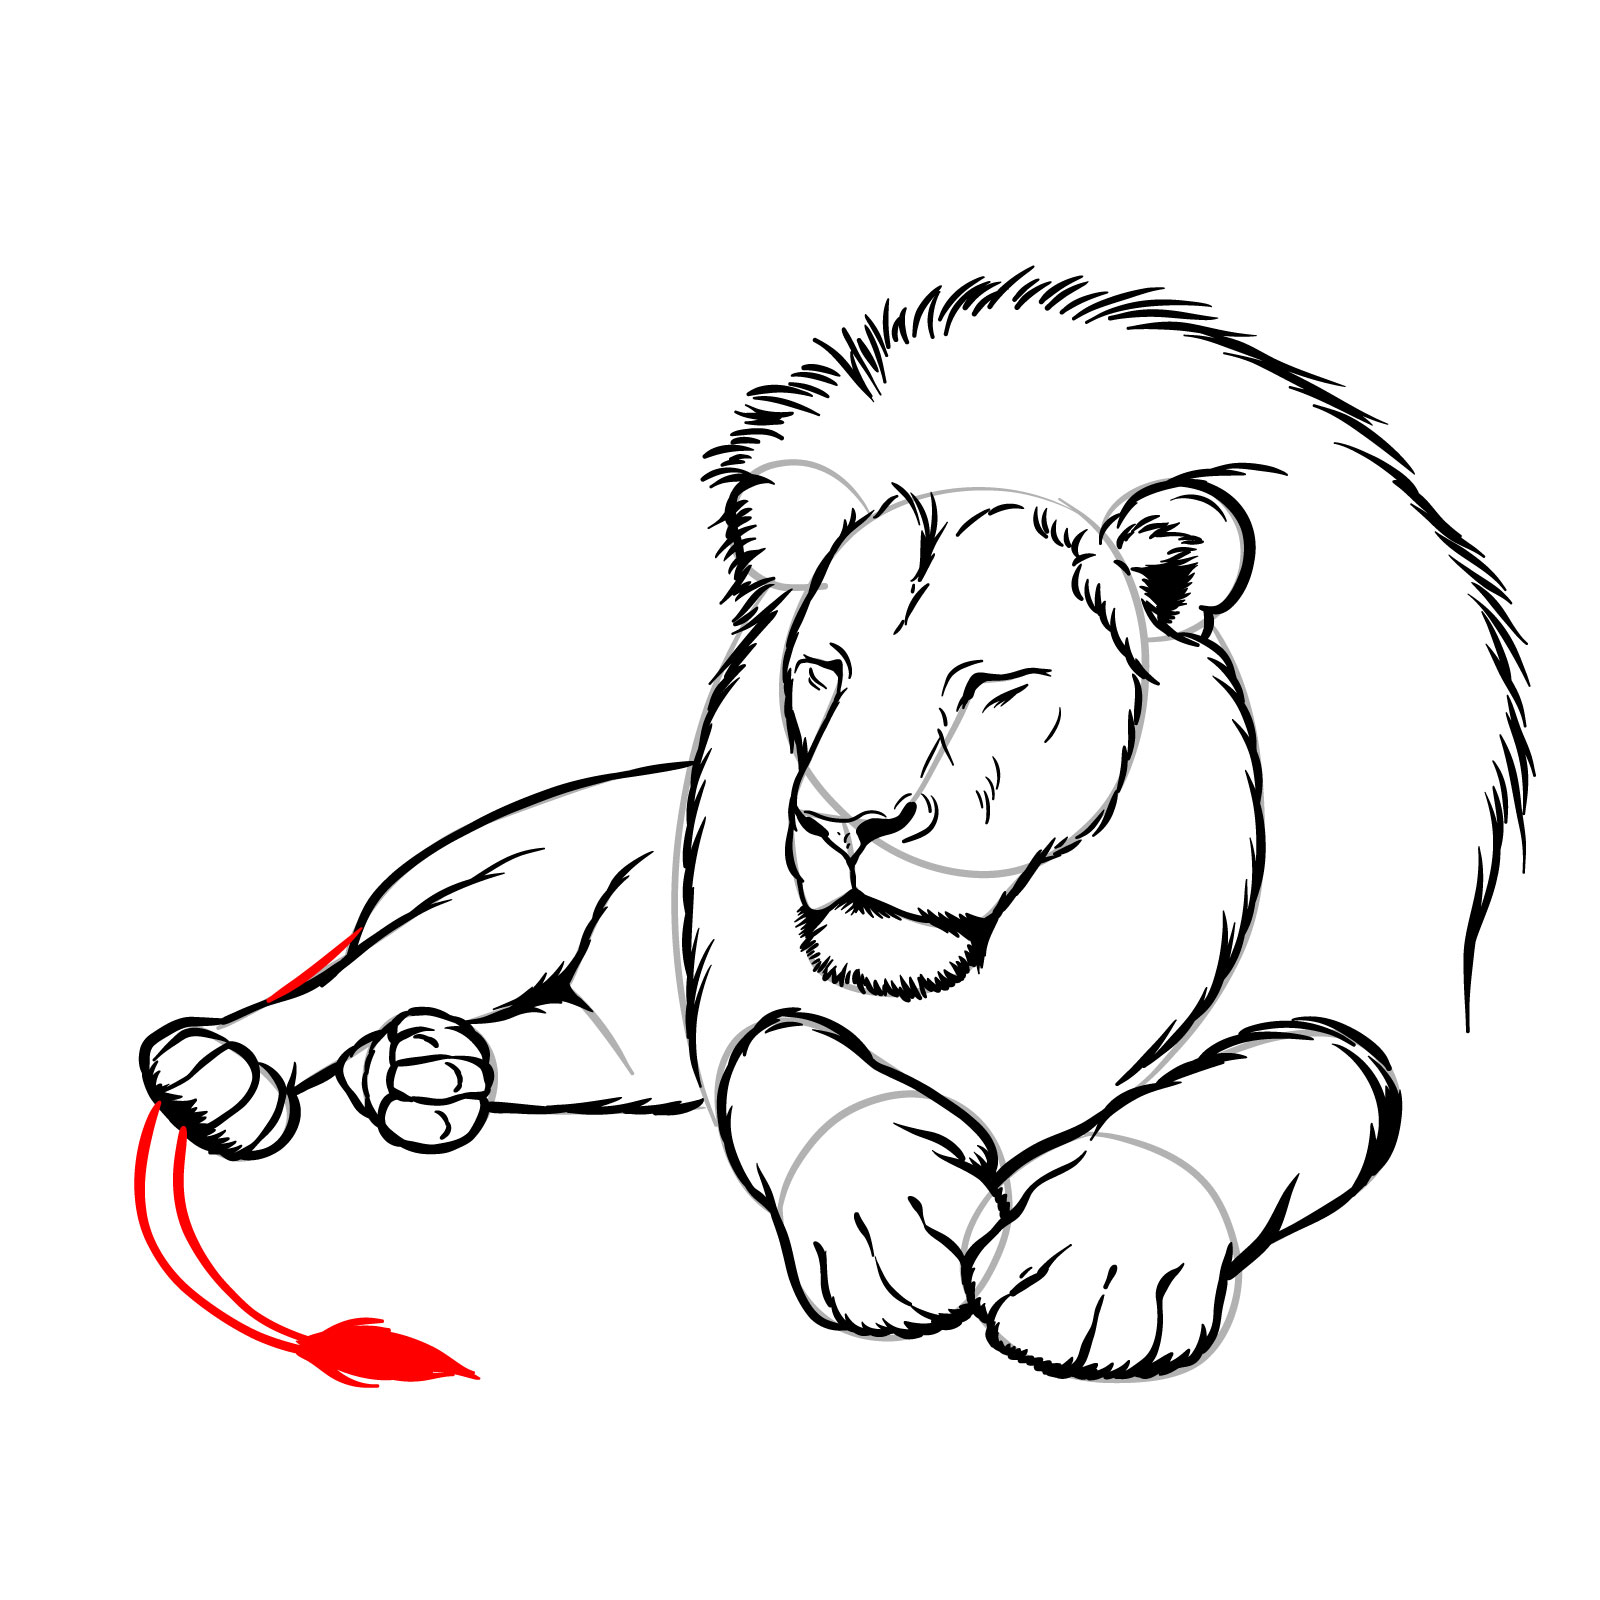 Sleeping lion drawing - Step 14: Sketching the tail and tuft